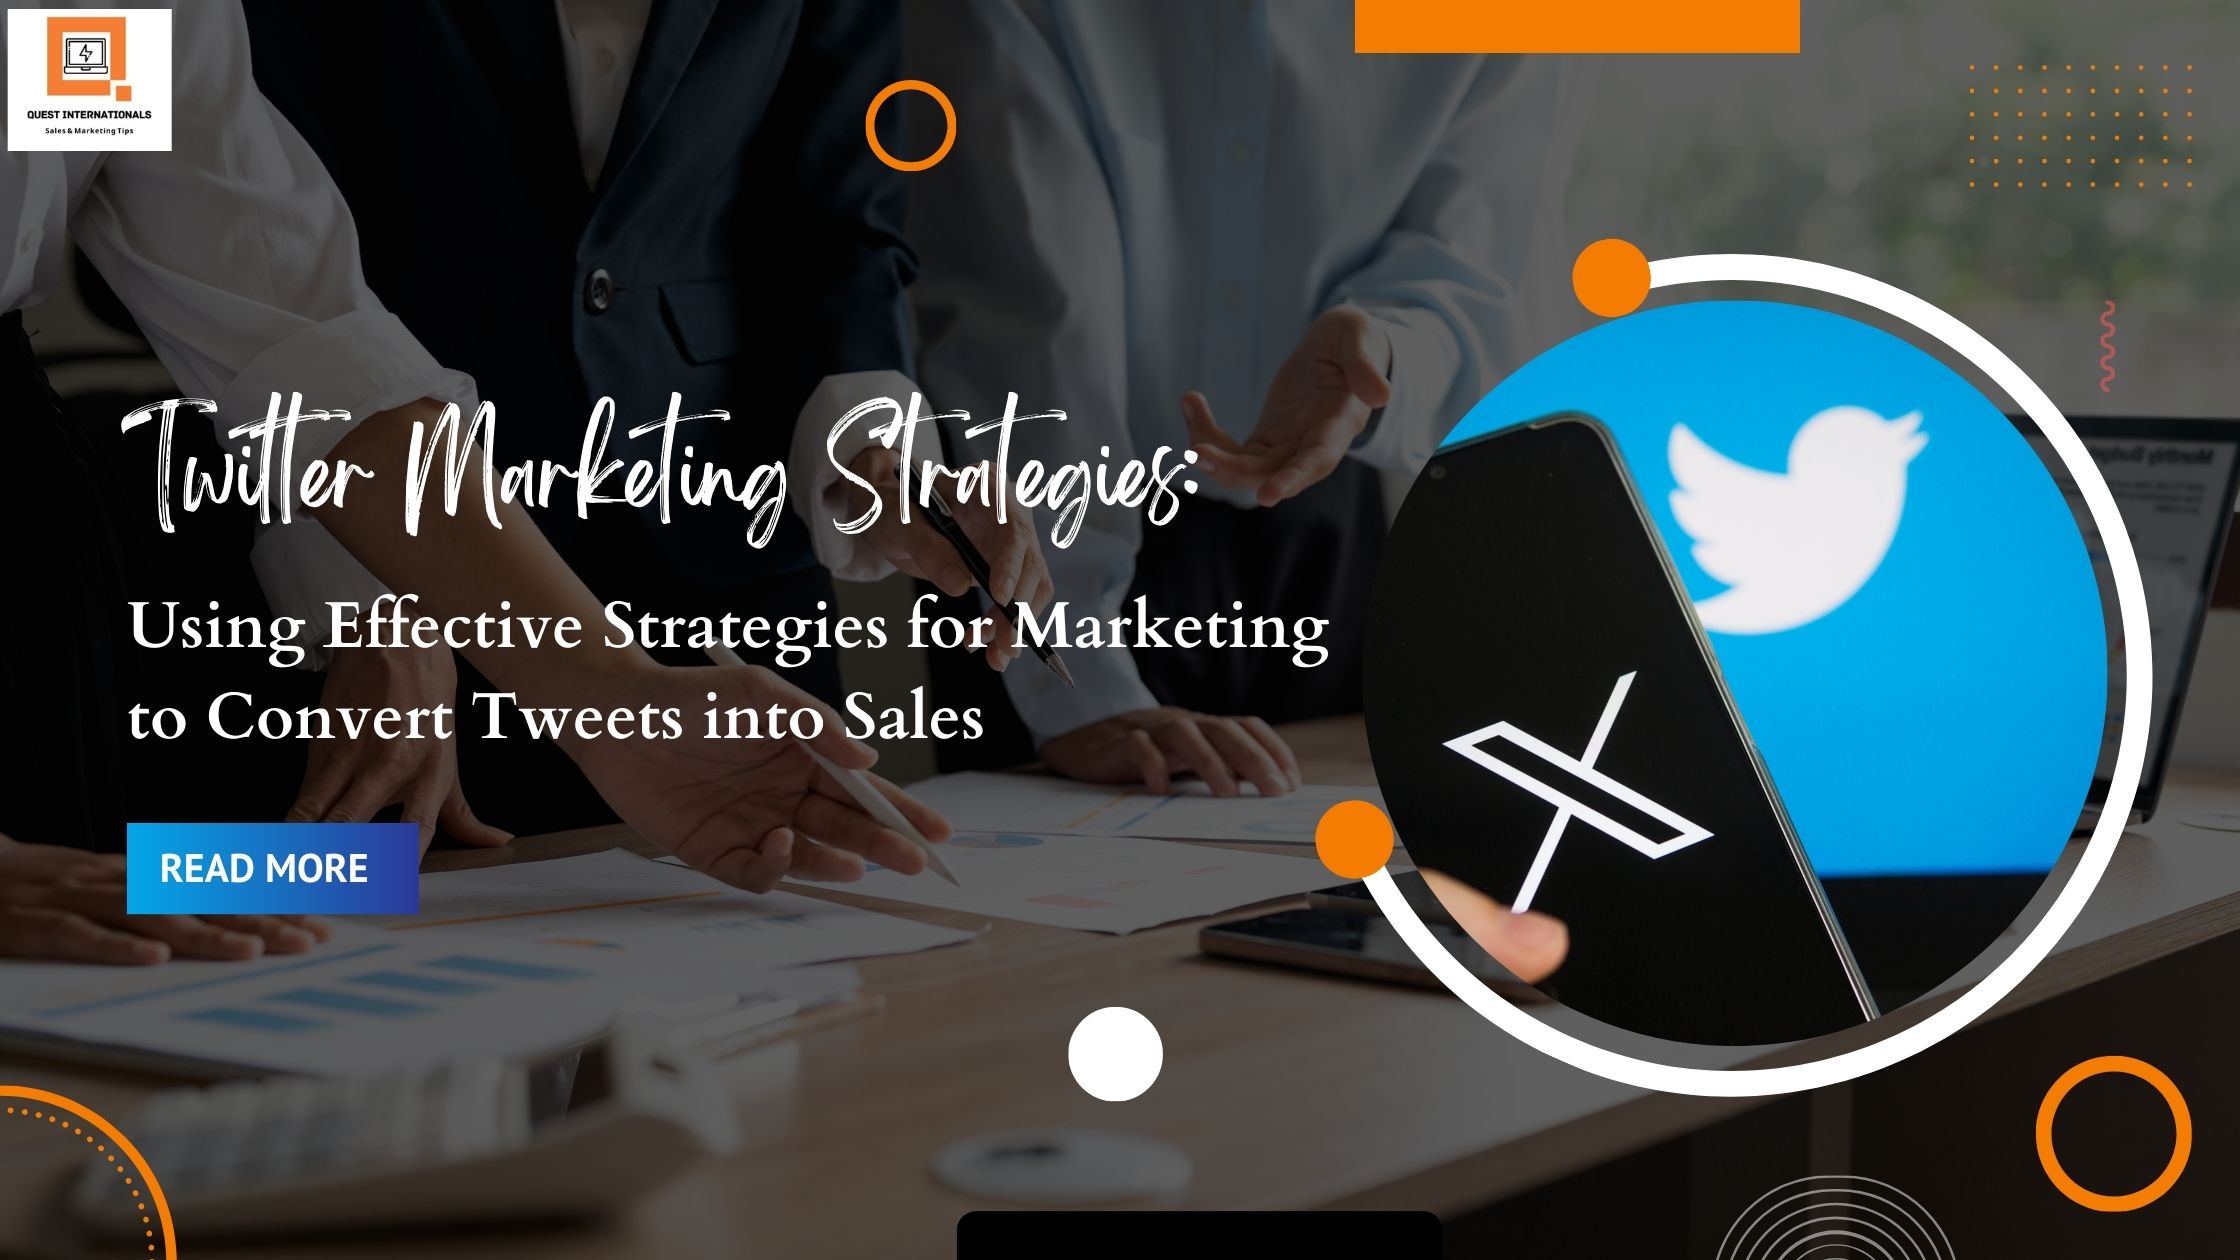 You are currently viewing Twitter Marketing Strategies: Using Effective Strategies for Marketing to Convert Tweets into Sales